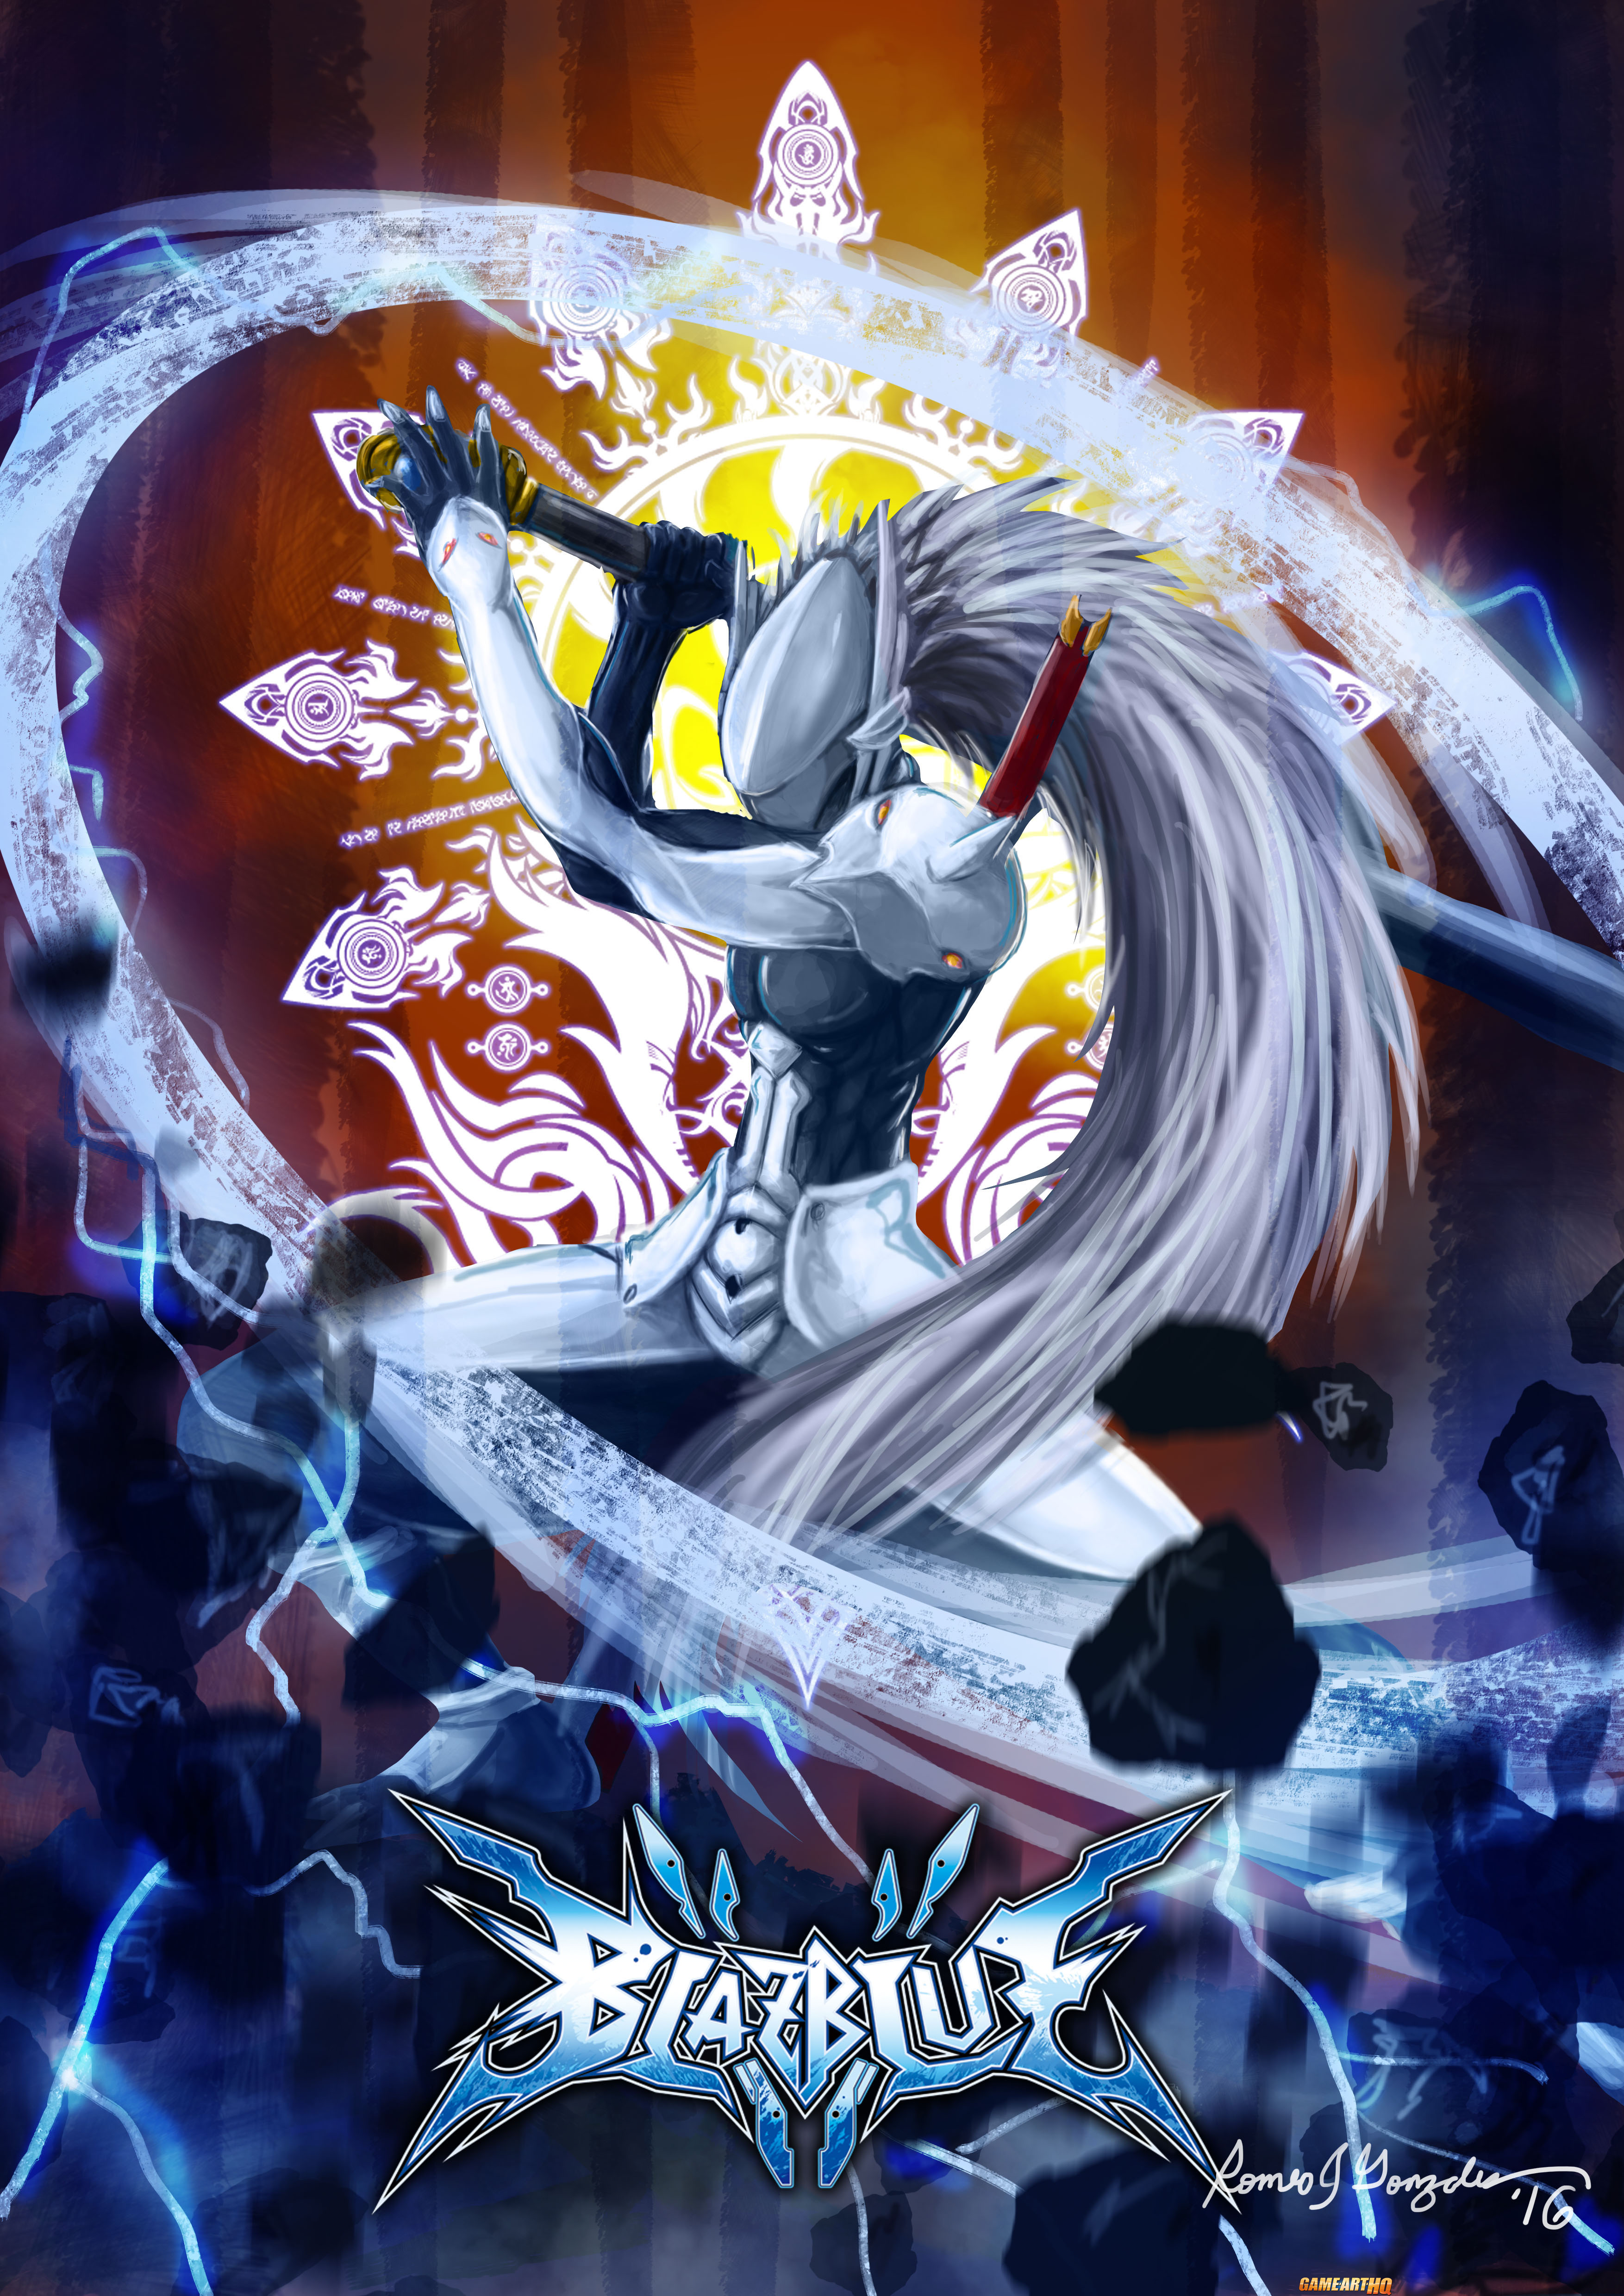 Hakumen from BlazBlue Art for the FGE Project